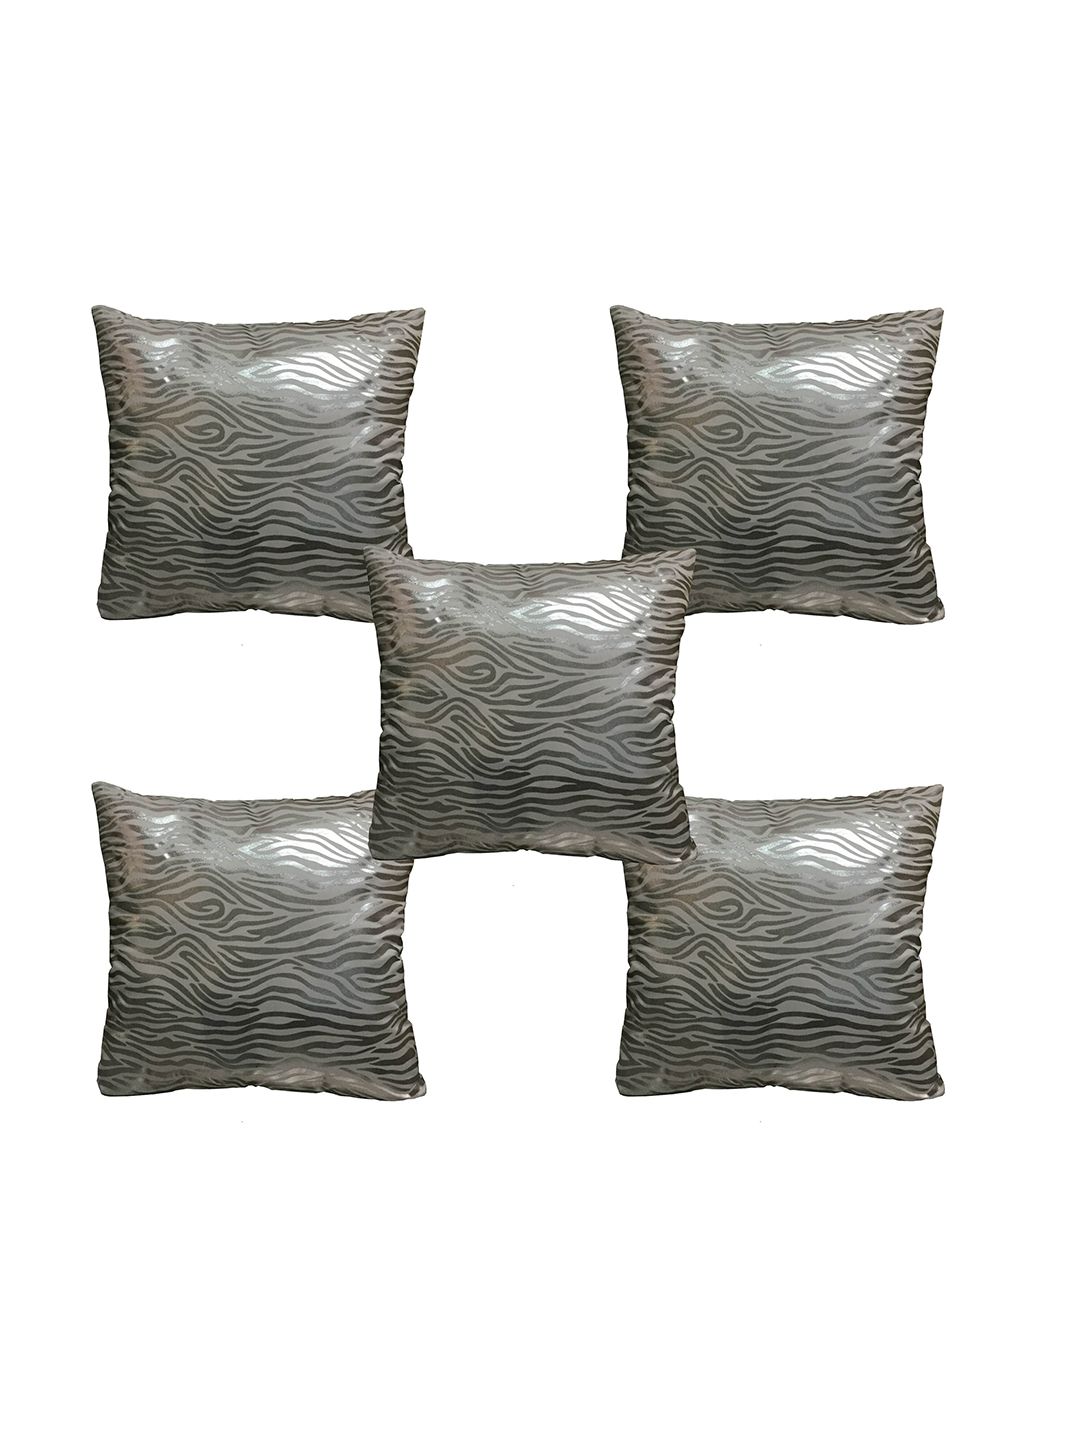 Lushomes Silver-Toned Set of 5 Foil Printed Square Cushion Covers Price in India